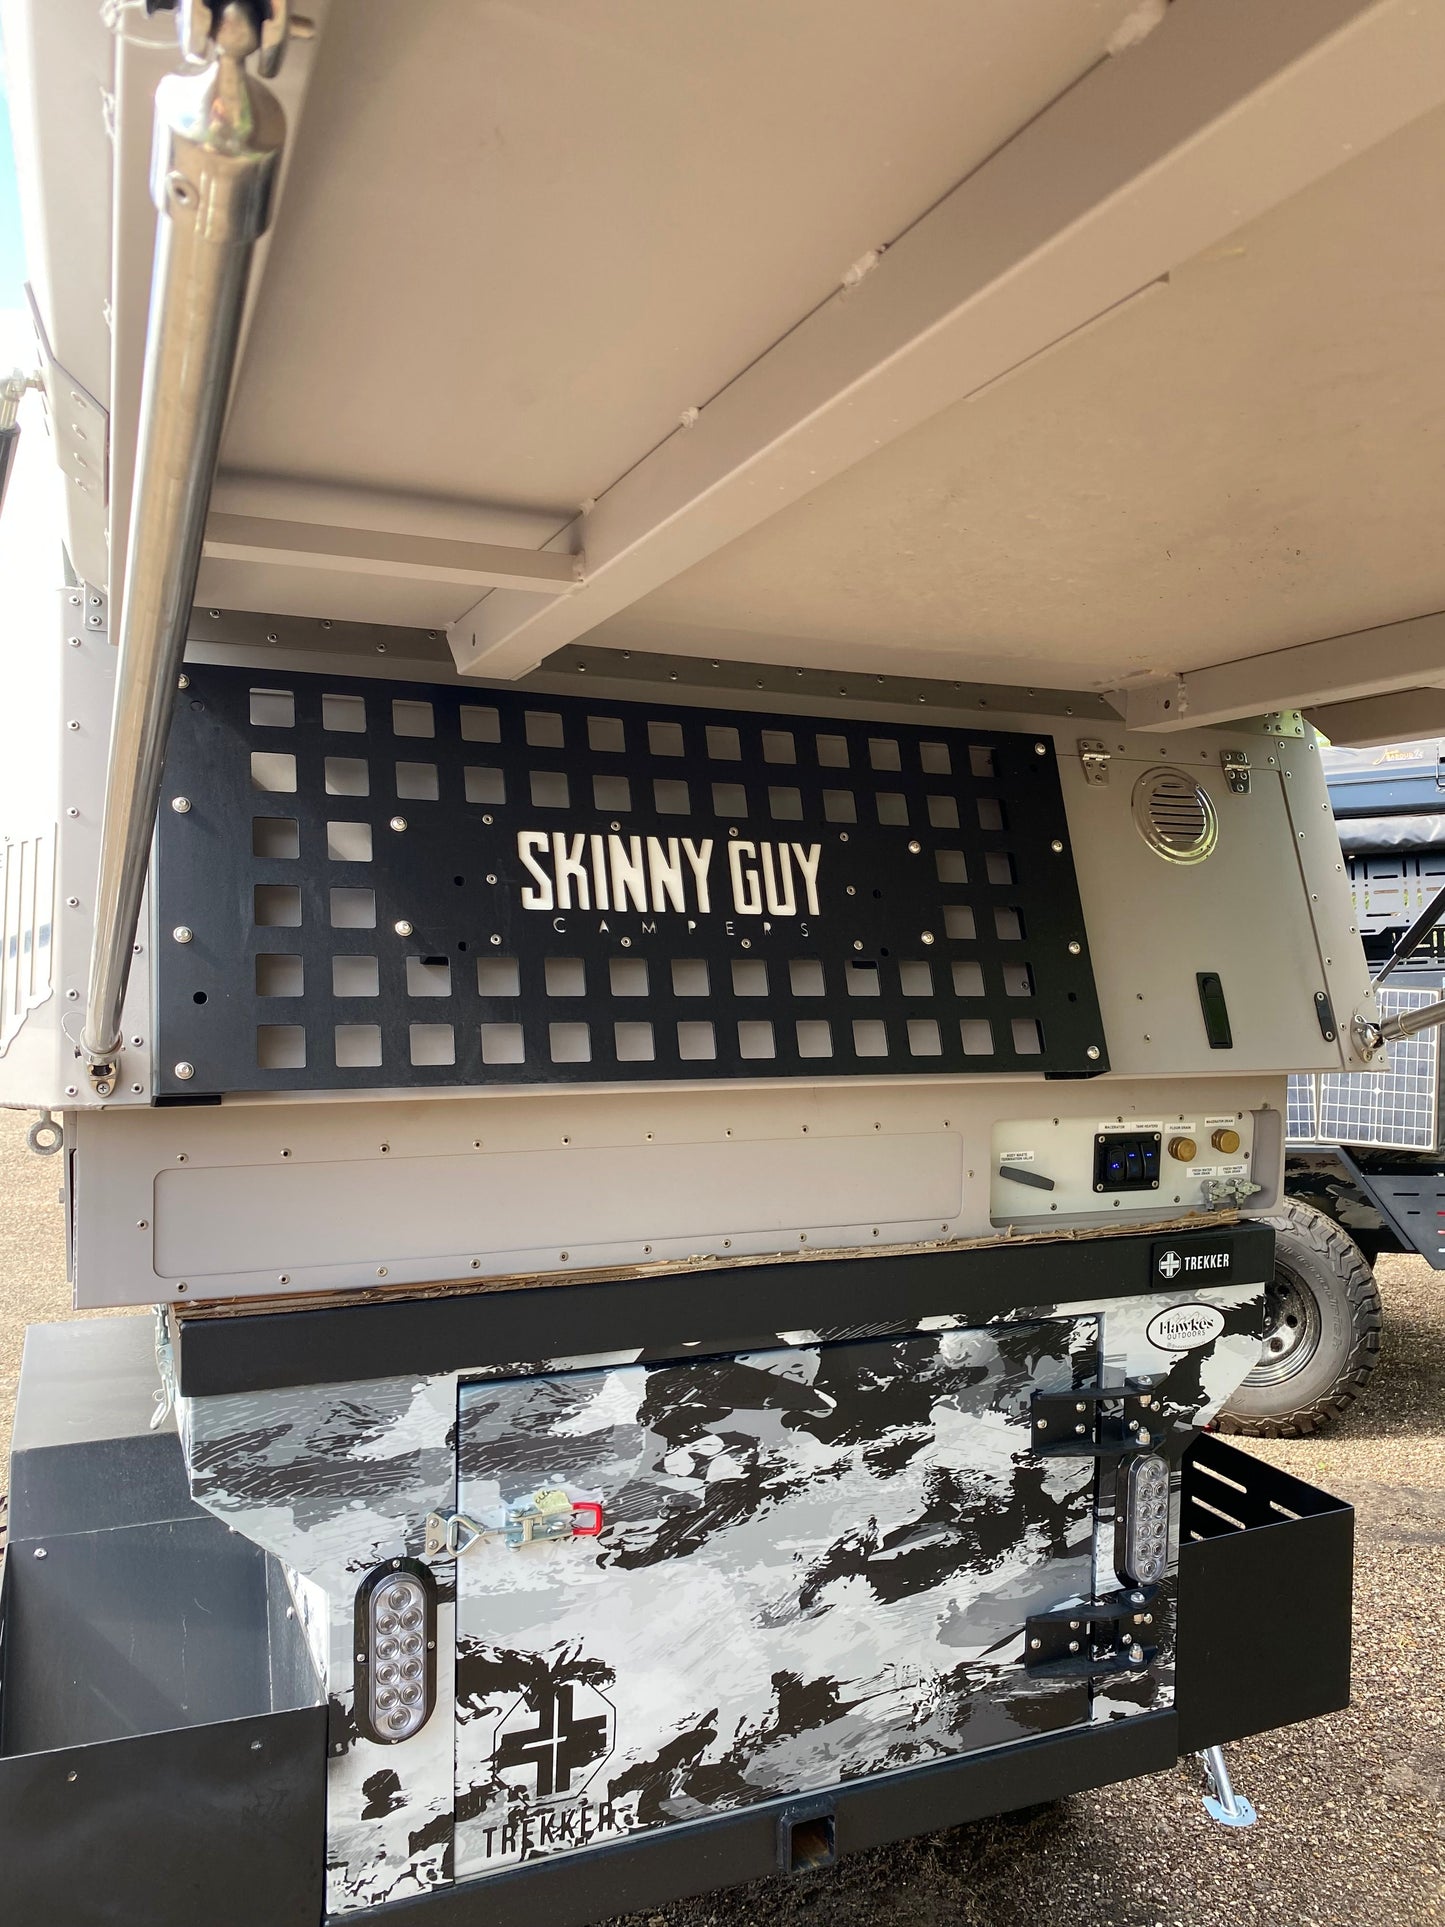 skinny guy truck bed all weather campers kit n kaboodle with outdoor kitchen and solar for sale near austin bastrop texas at hawkes outdoors 2102512882